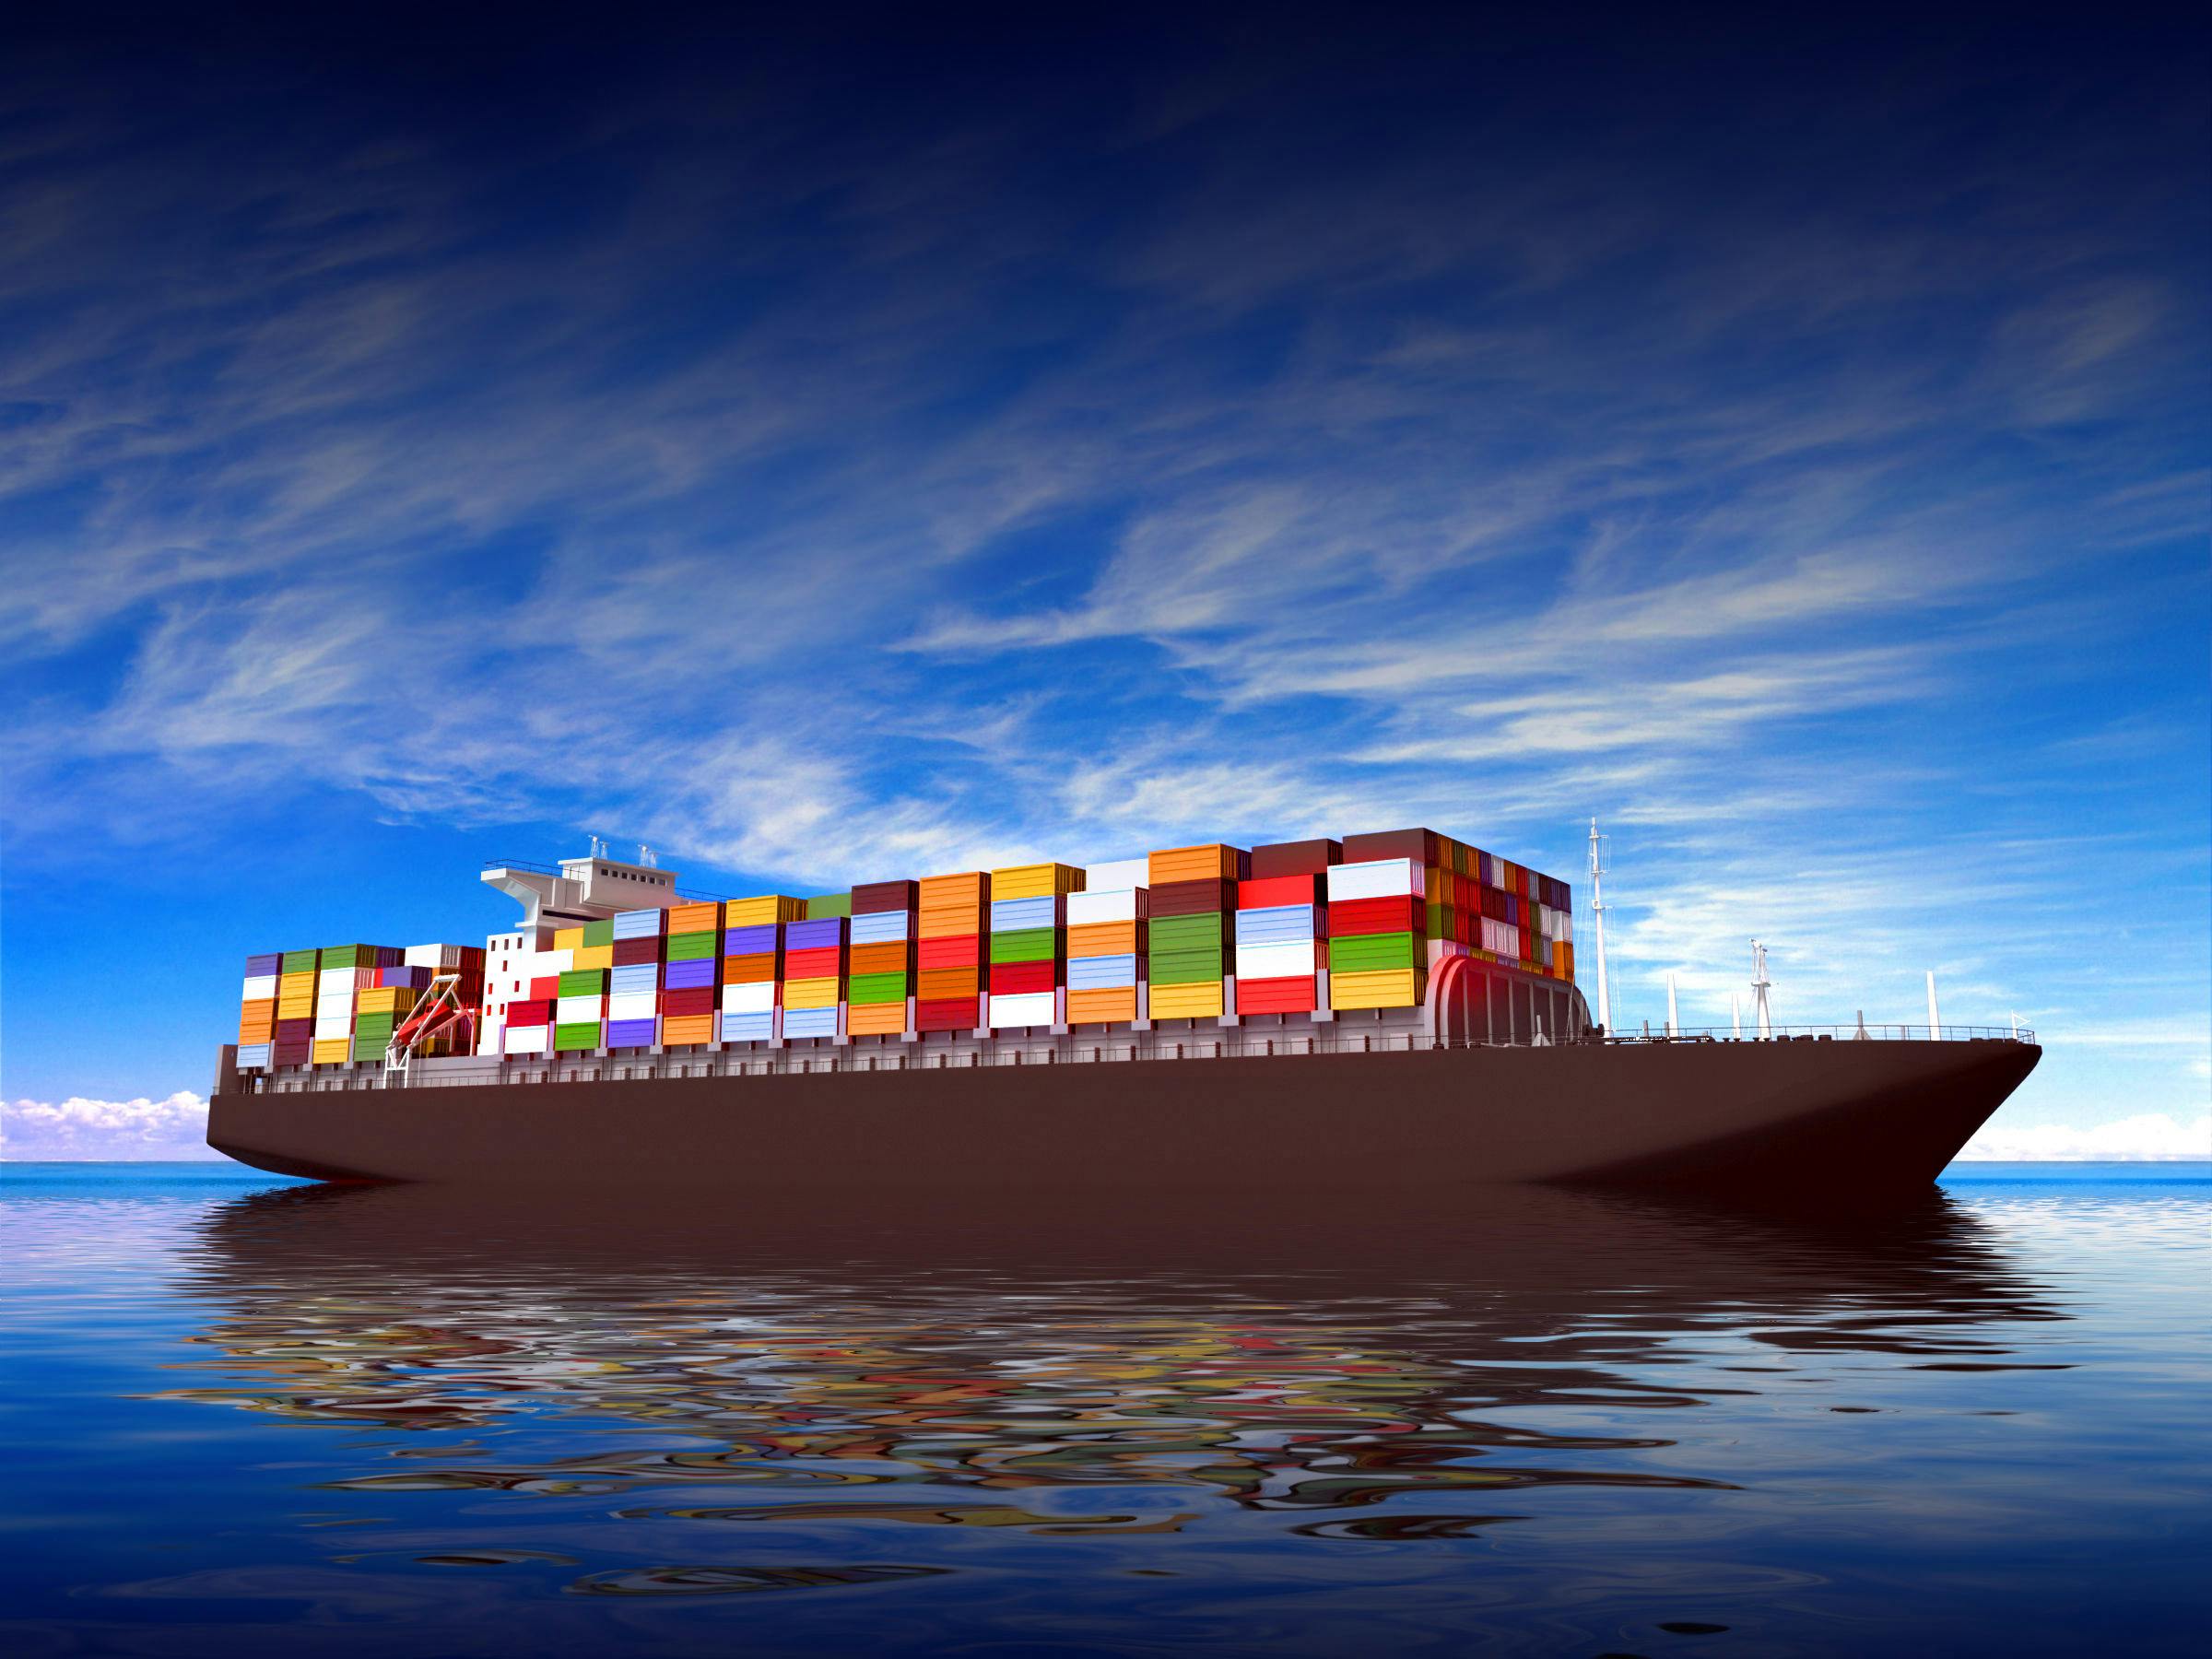 Large container ship Against a beautiful sea landscape
